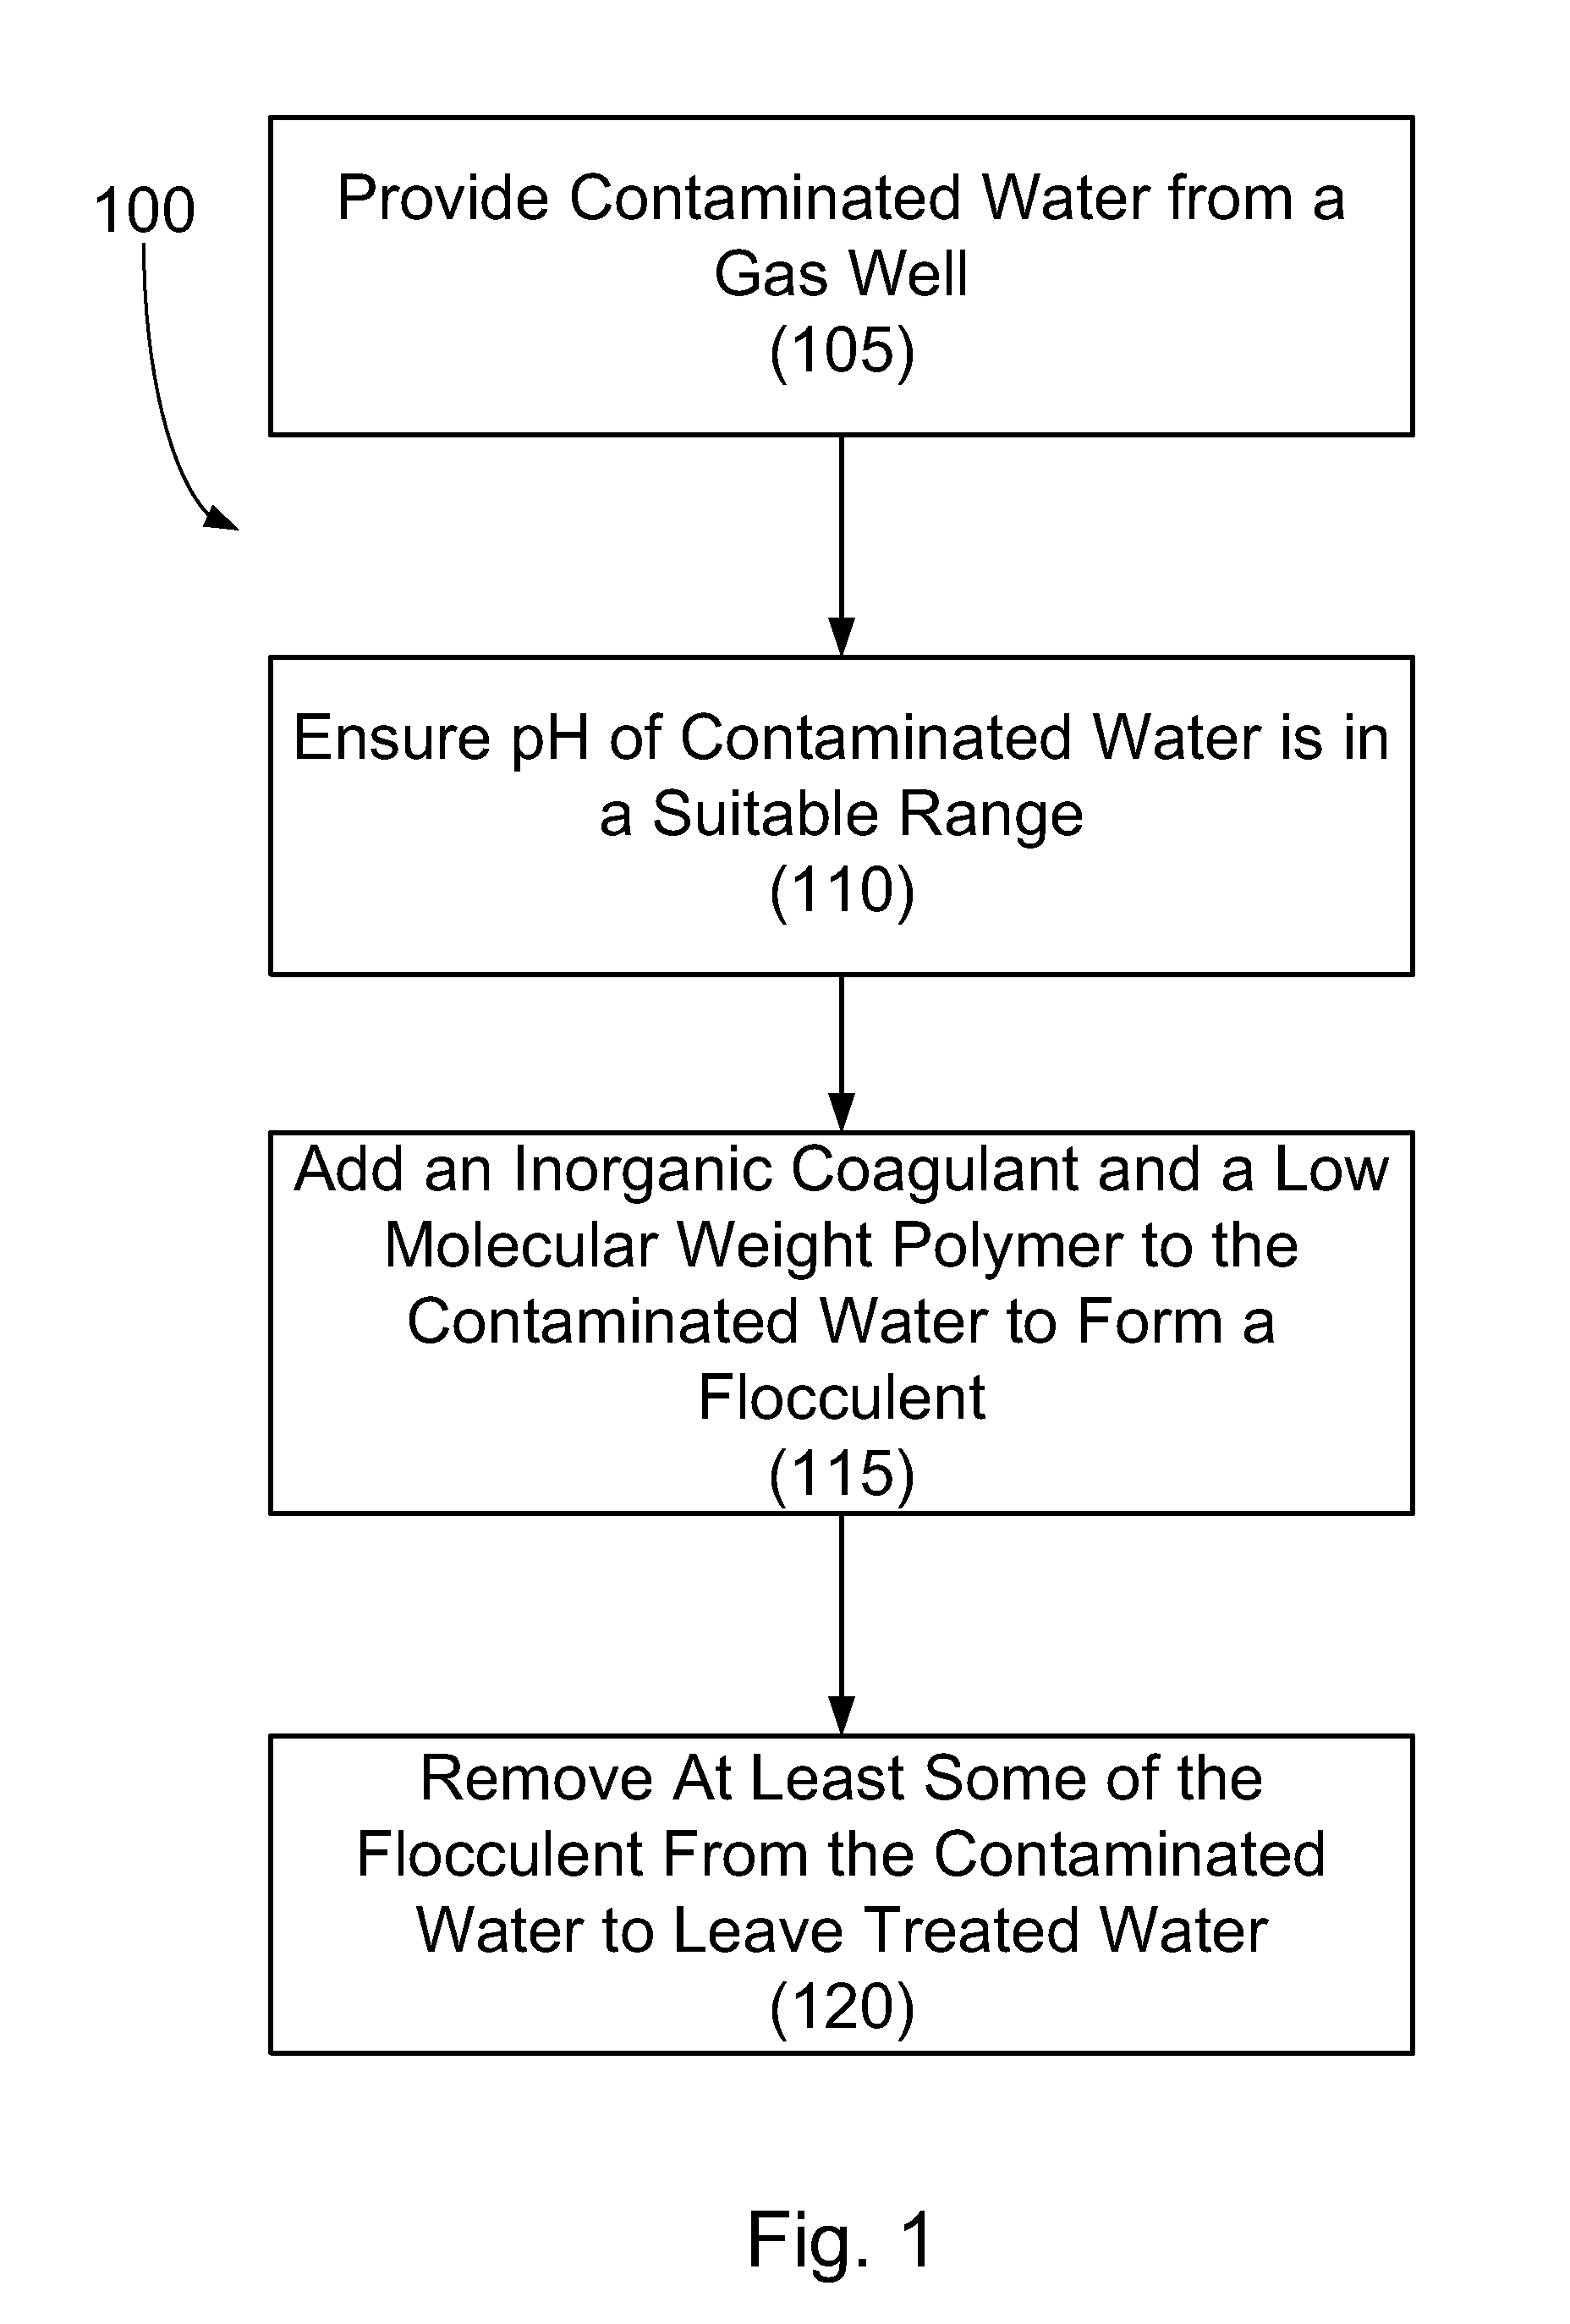 Treatment of contaminated water from gas wells